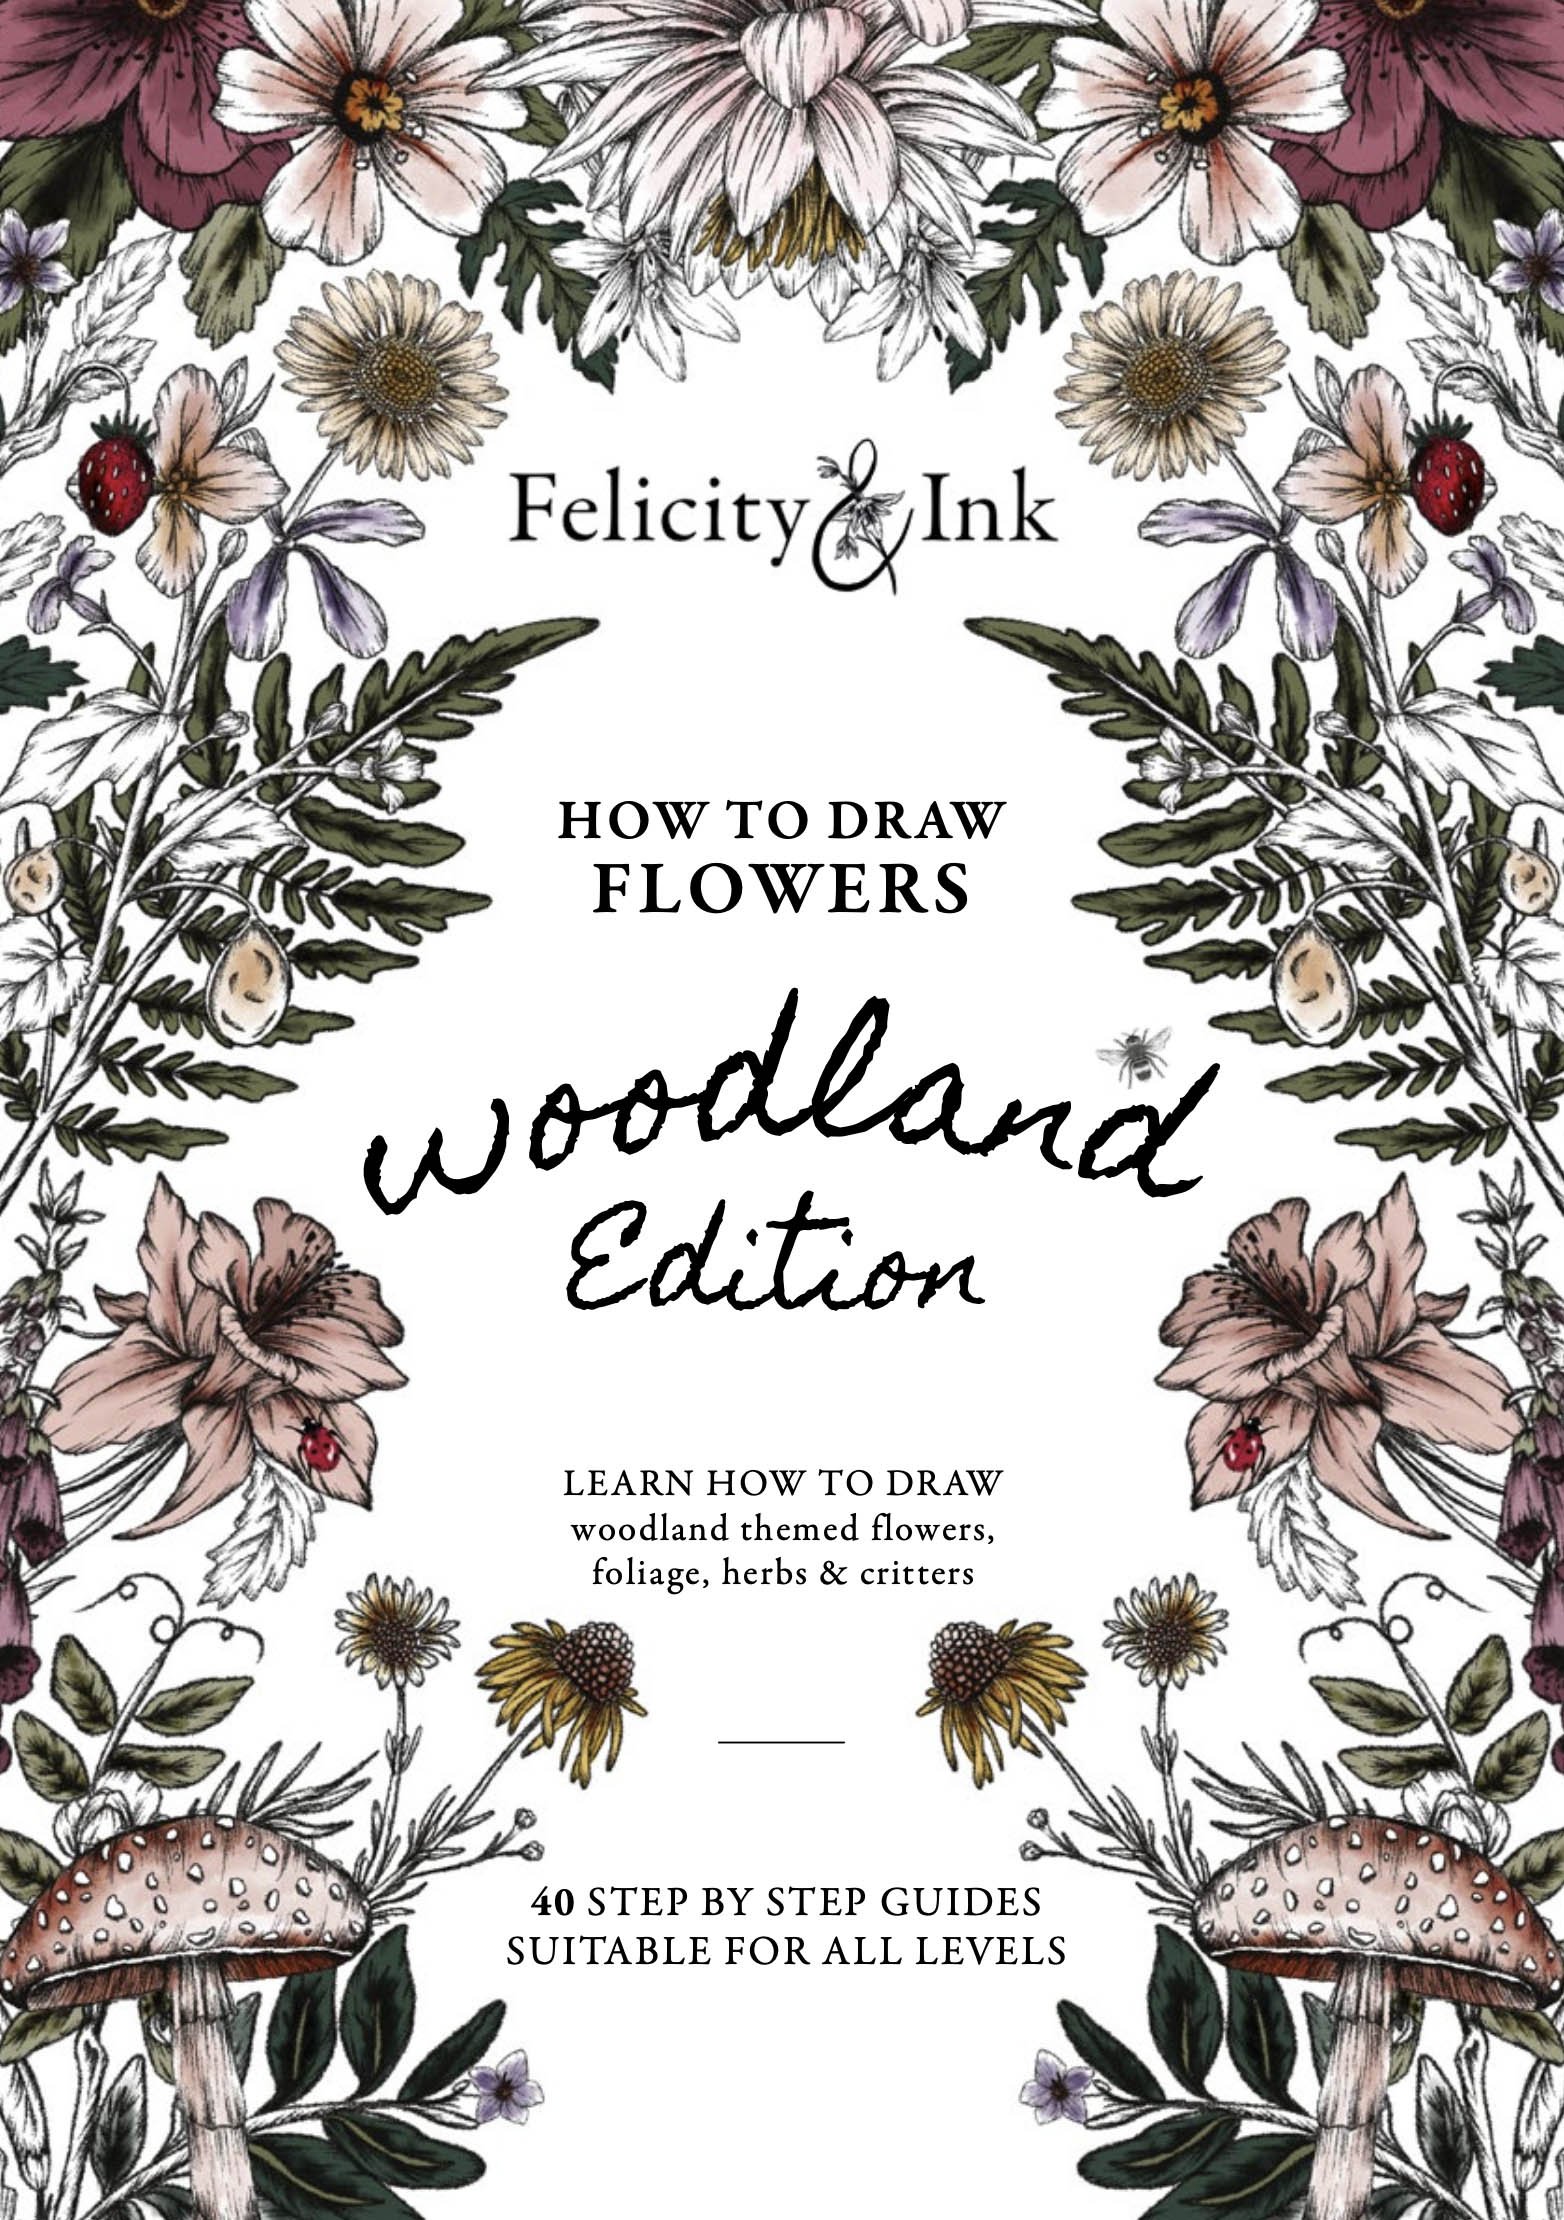 felicity-and-ink-how-to-draw-woodland-flowers-insects-step-by-step-ebook-s.jpg